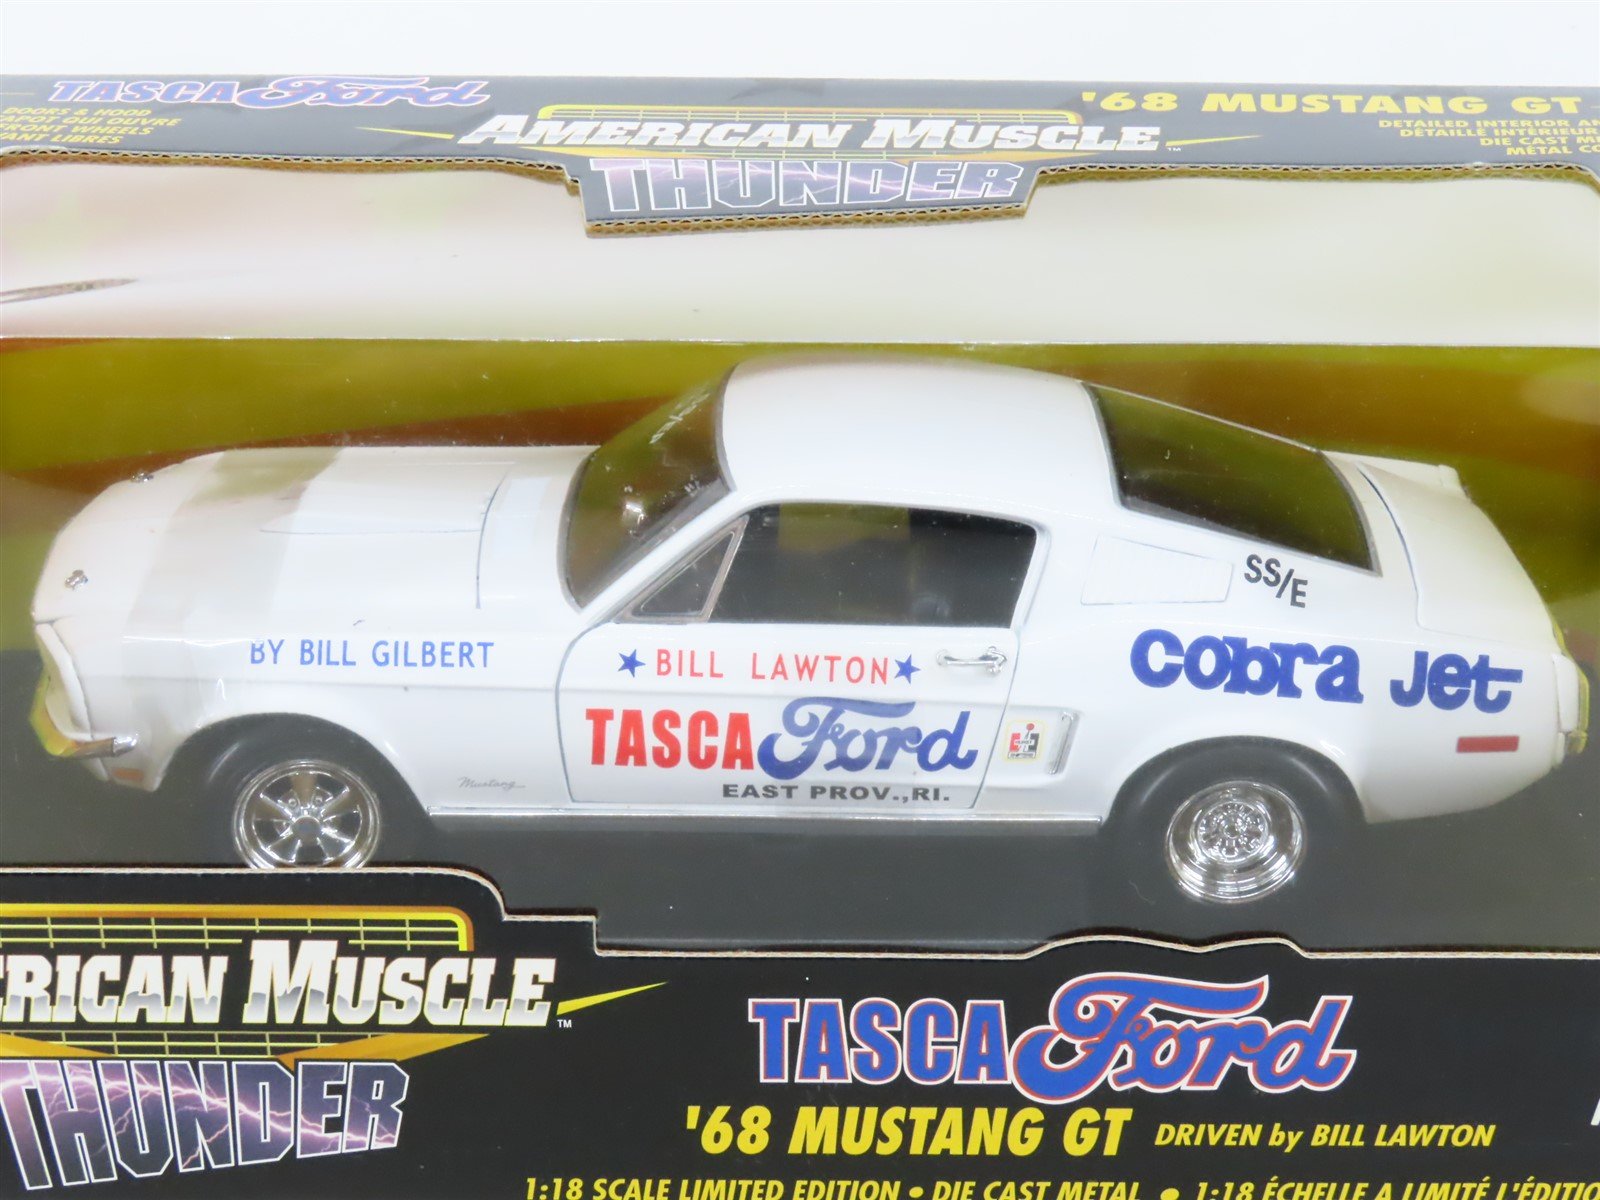 1:18 ERTL American Muscle THUNDER 33098 Tasca Ford 68' Mustang GT 